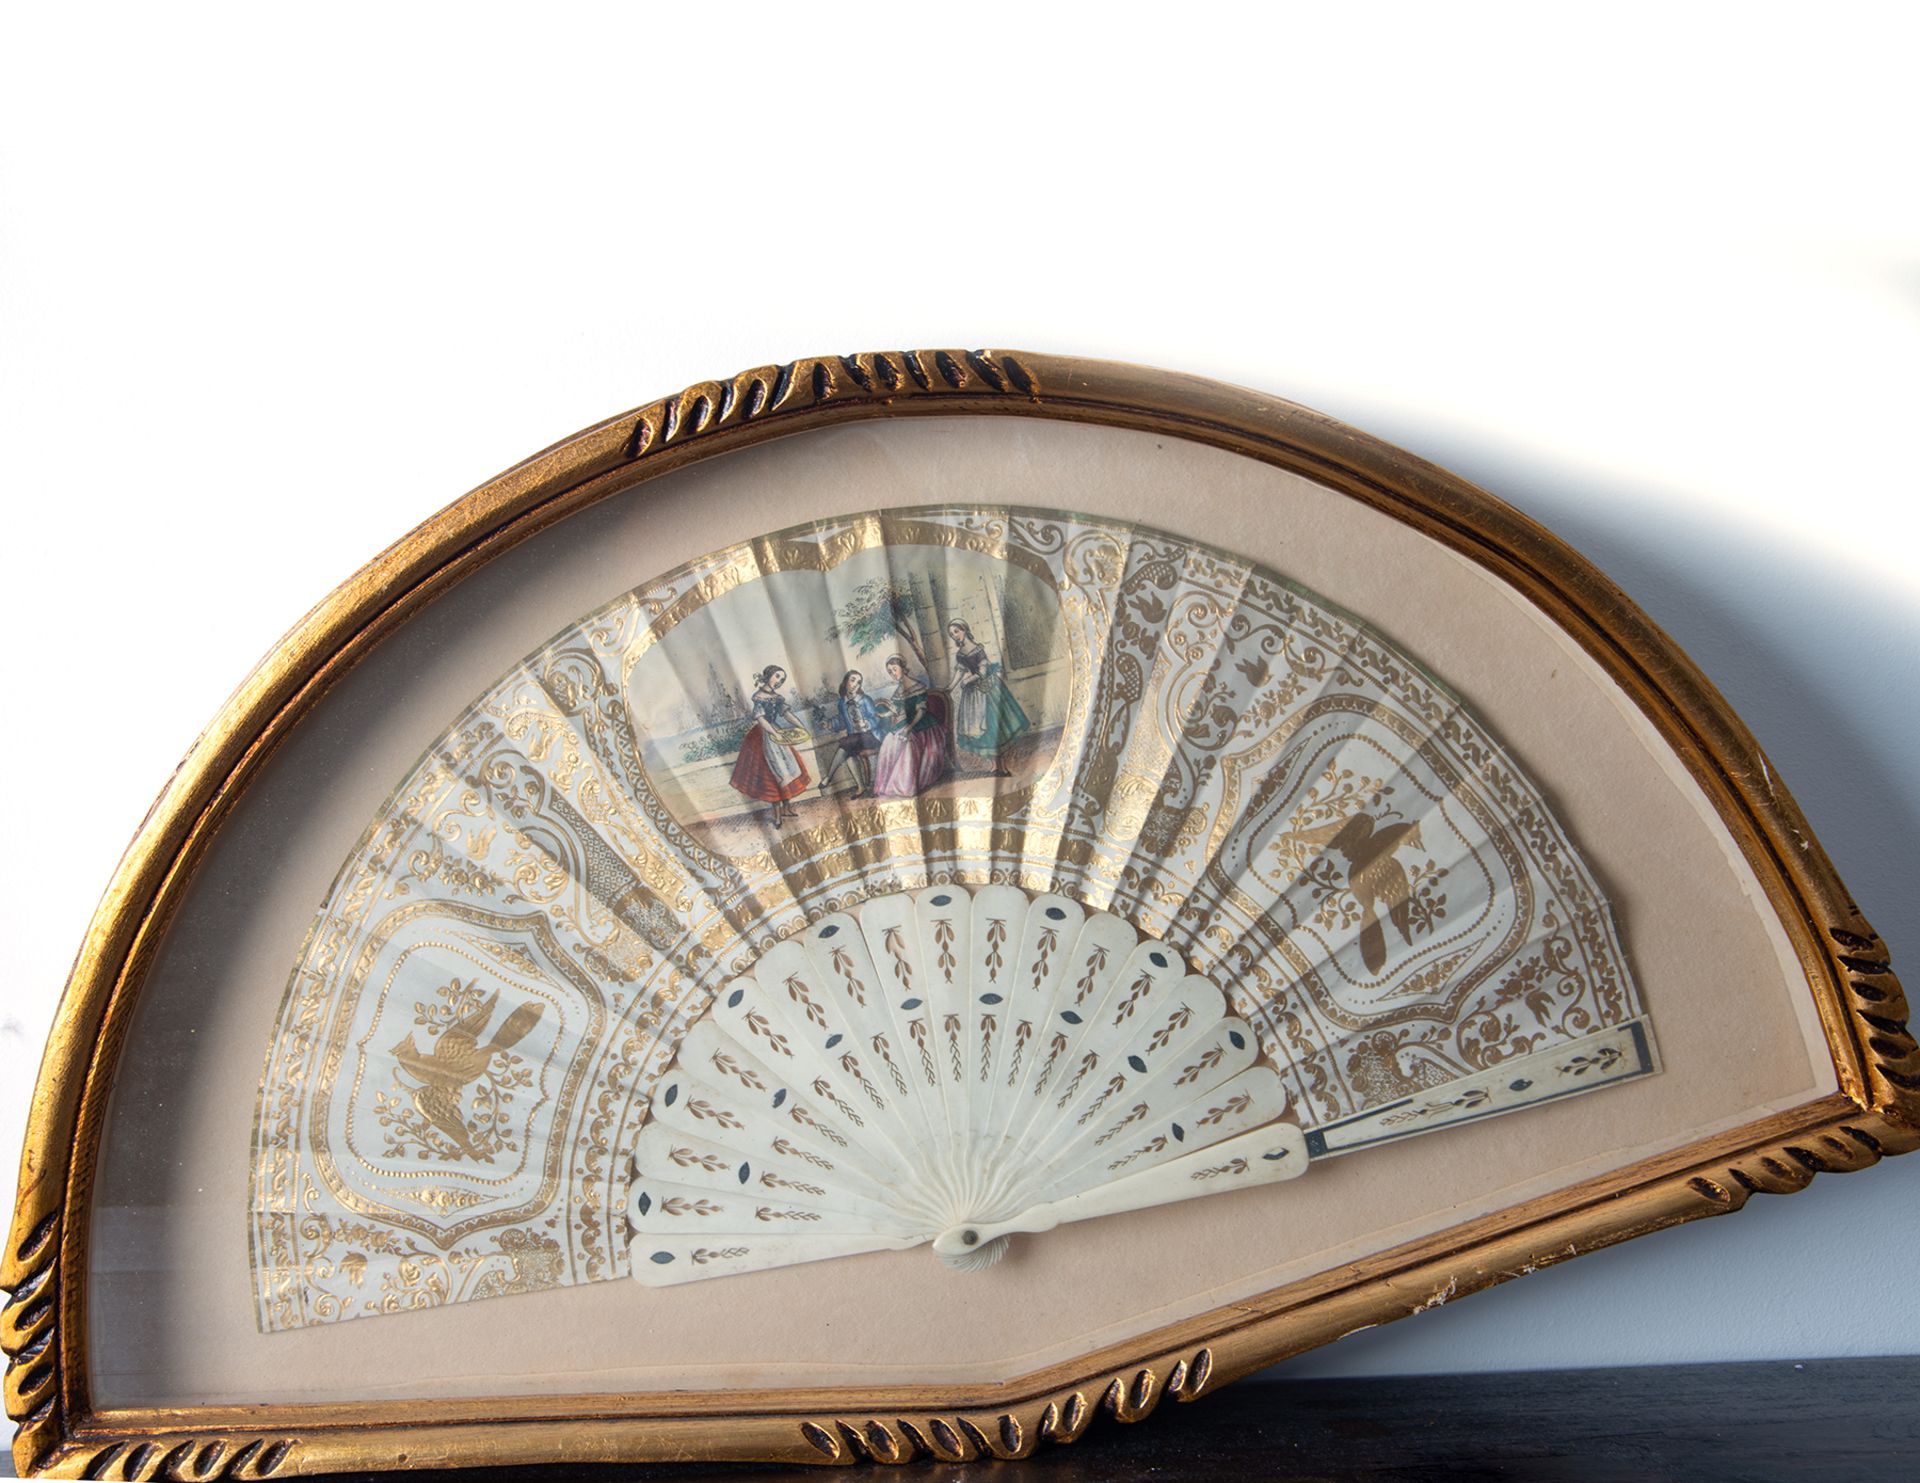 French fan with a gallant scene in a garden, 19th century